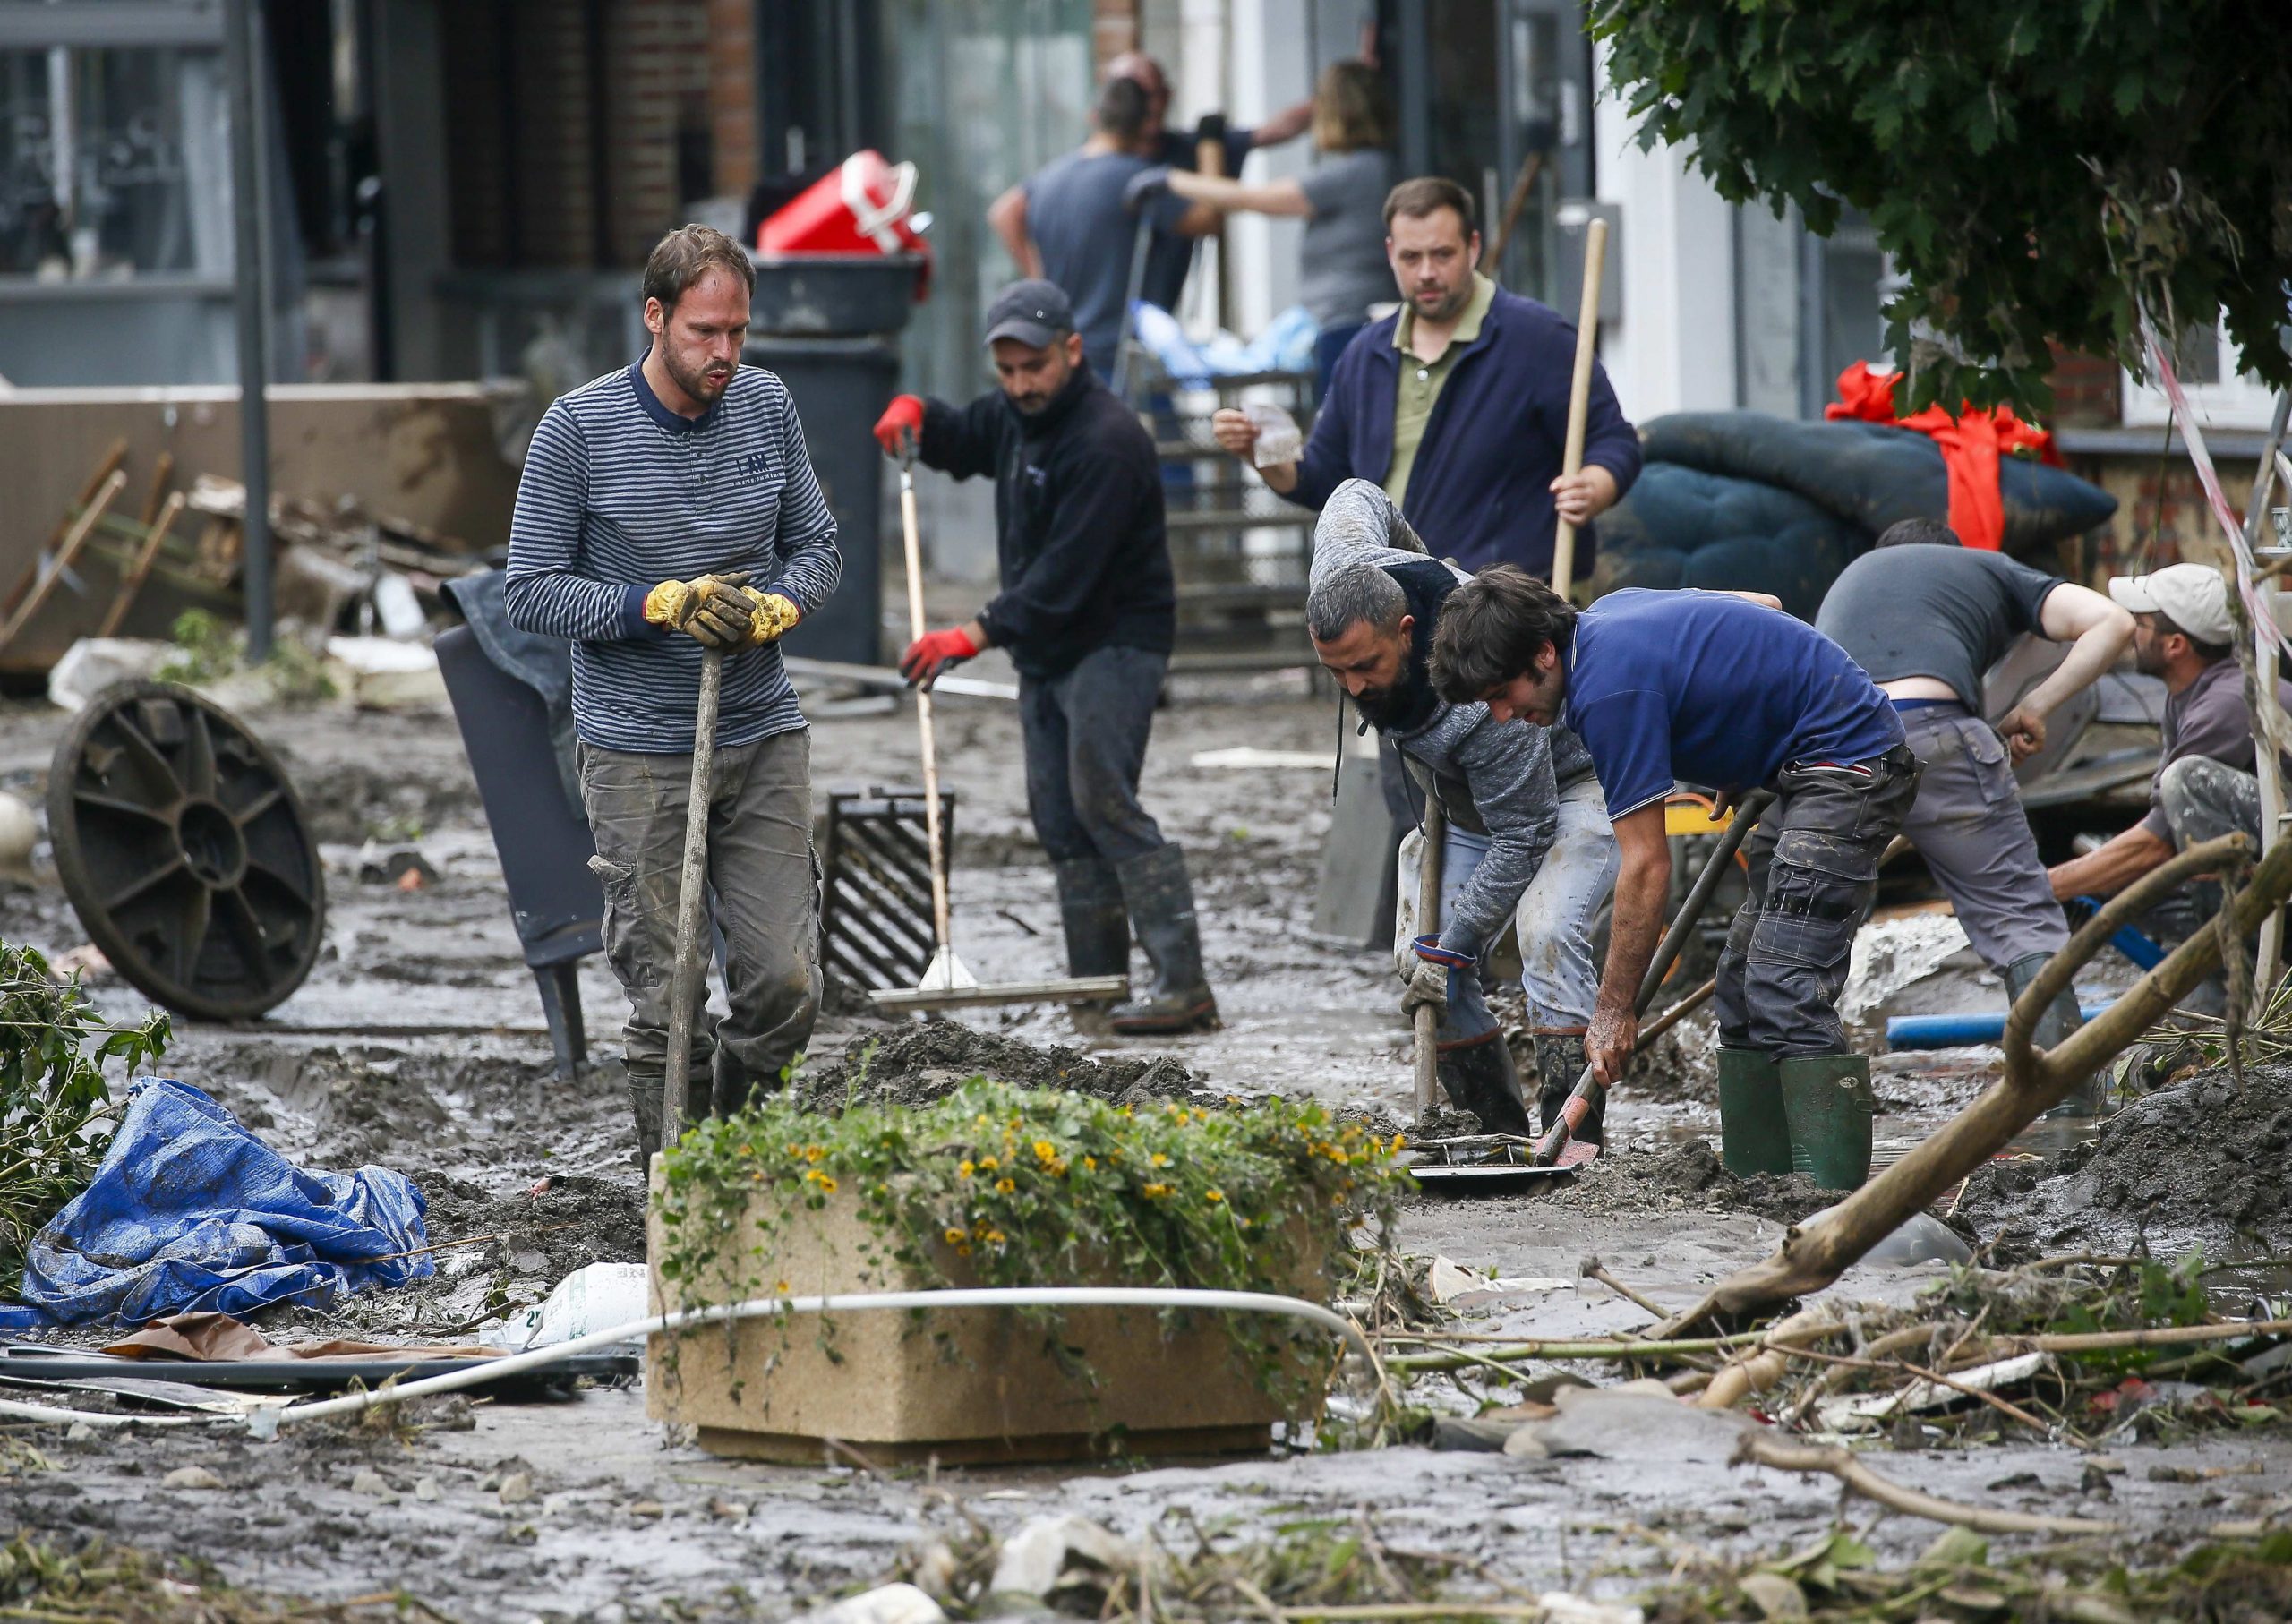 In Belgium, there may be more victims in collapsed buildings